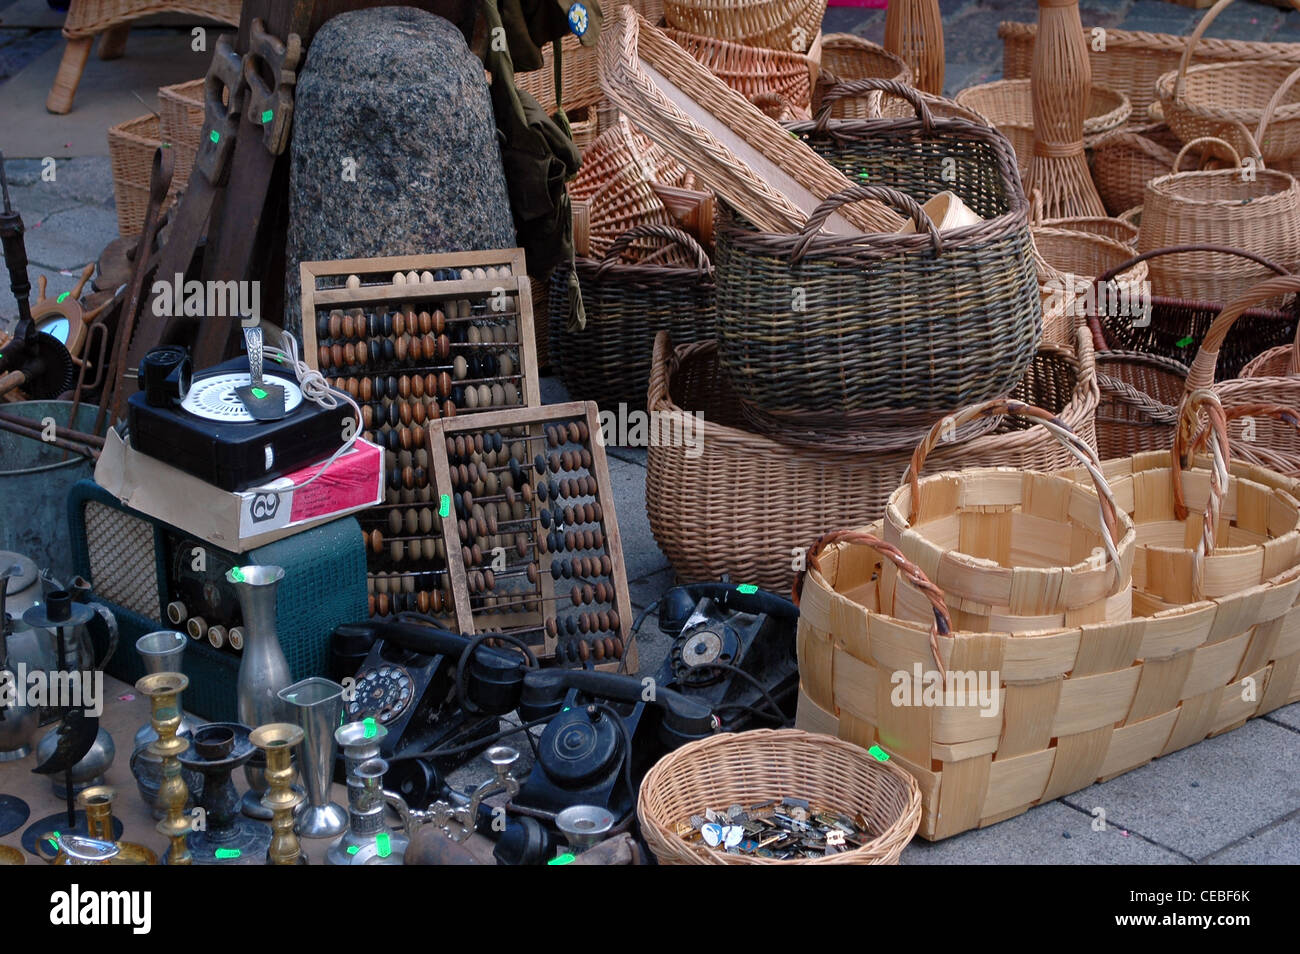 handmade wooden wattled basket in market with other antiques Stock Photo